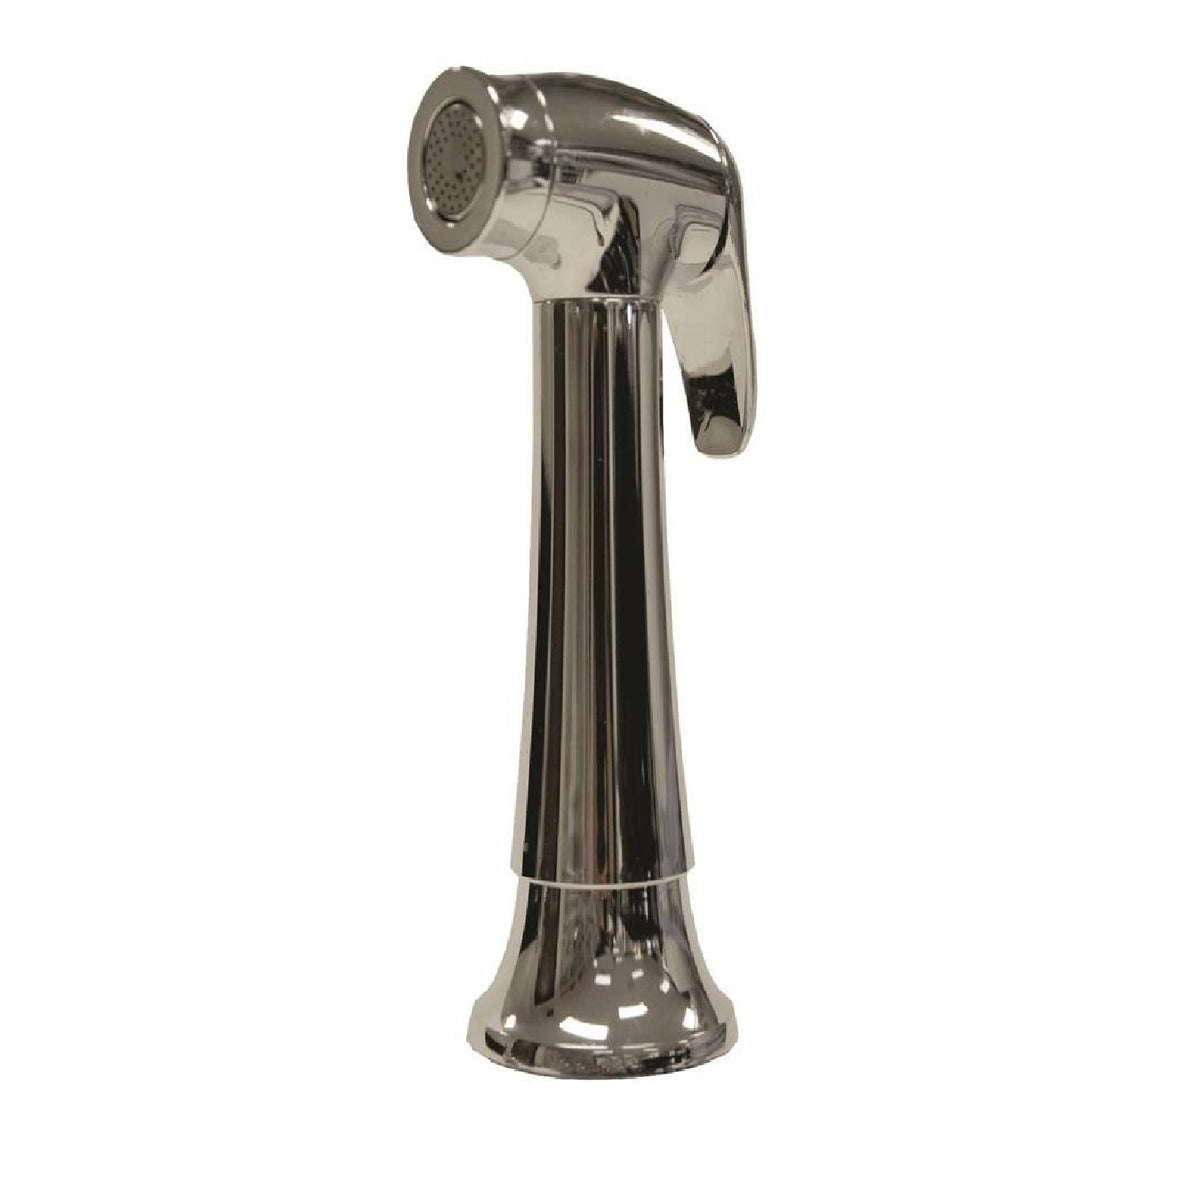 buy faucet & sink repair tools & parts at cheap rate in bulk. wholesale & retail plumbing supplies & tools store. home décor ideas, maintenance, repair replacement parts